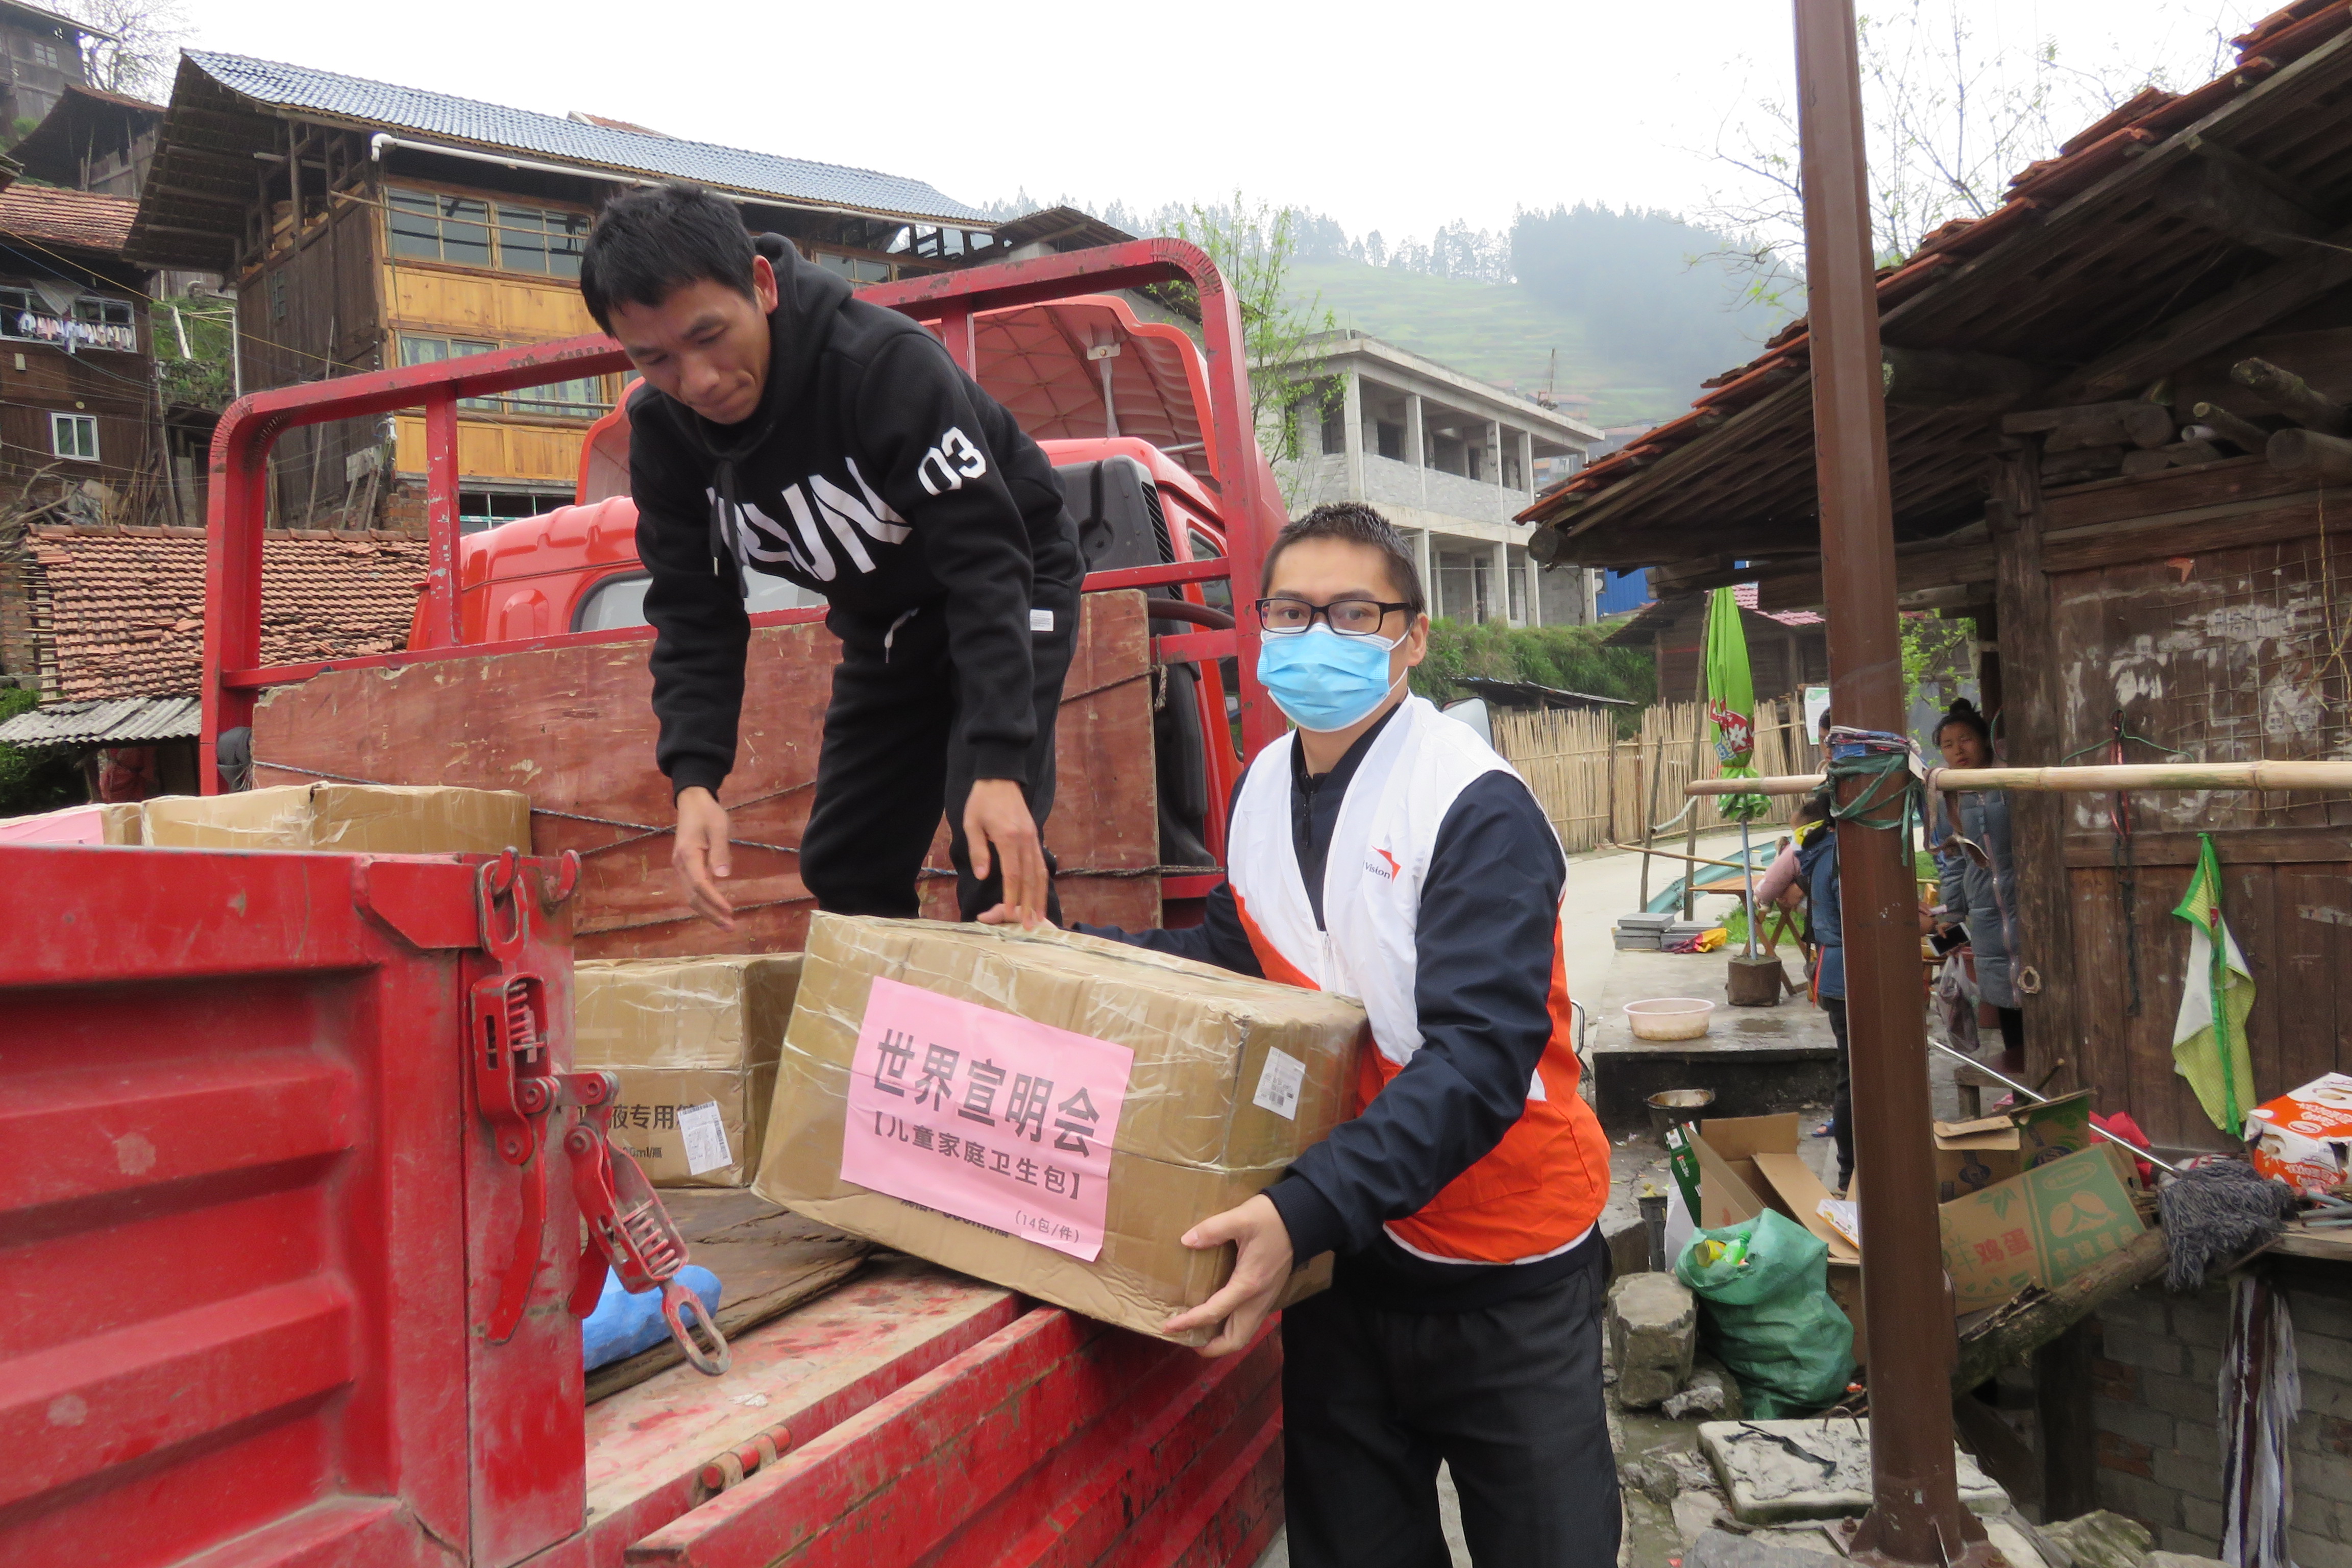 World Vision staff member in China wears a mask as he unloads a box of medical supplies like thermometers for a community